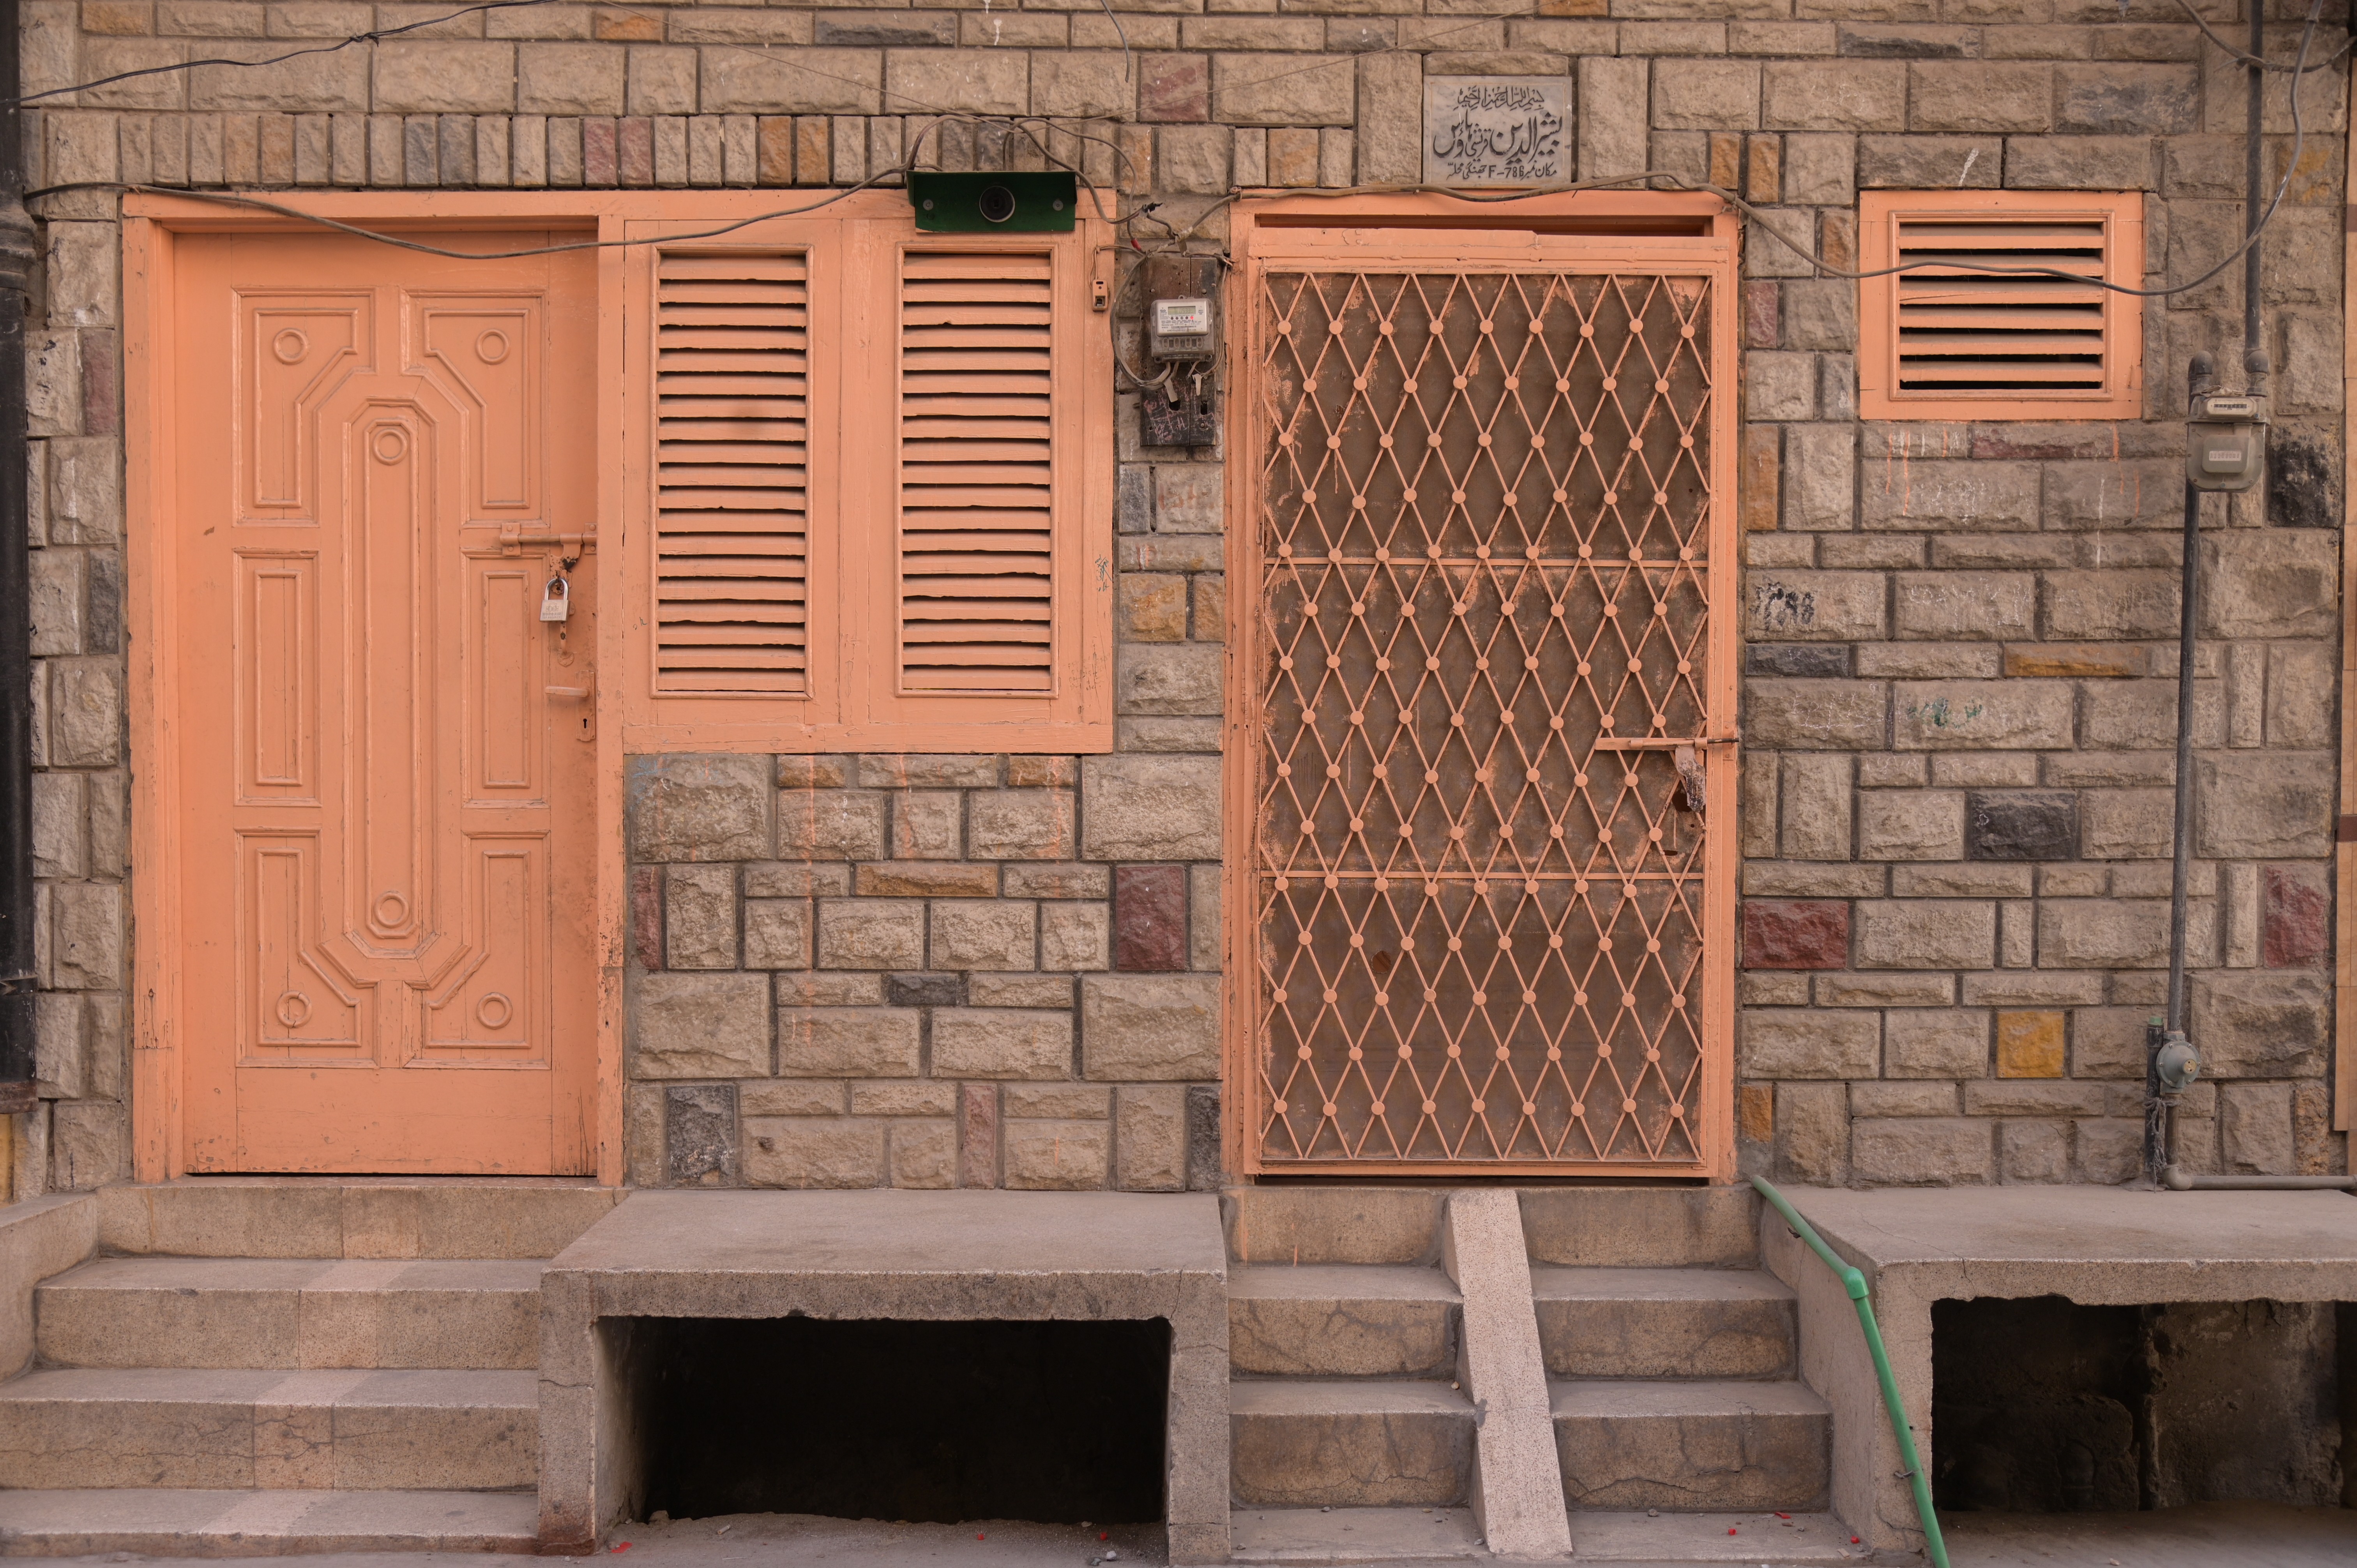 An old-fashioned house with wooden doors showing the ancient culture of Rawalpindi